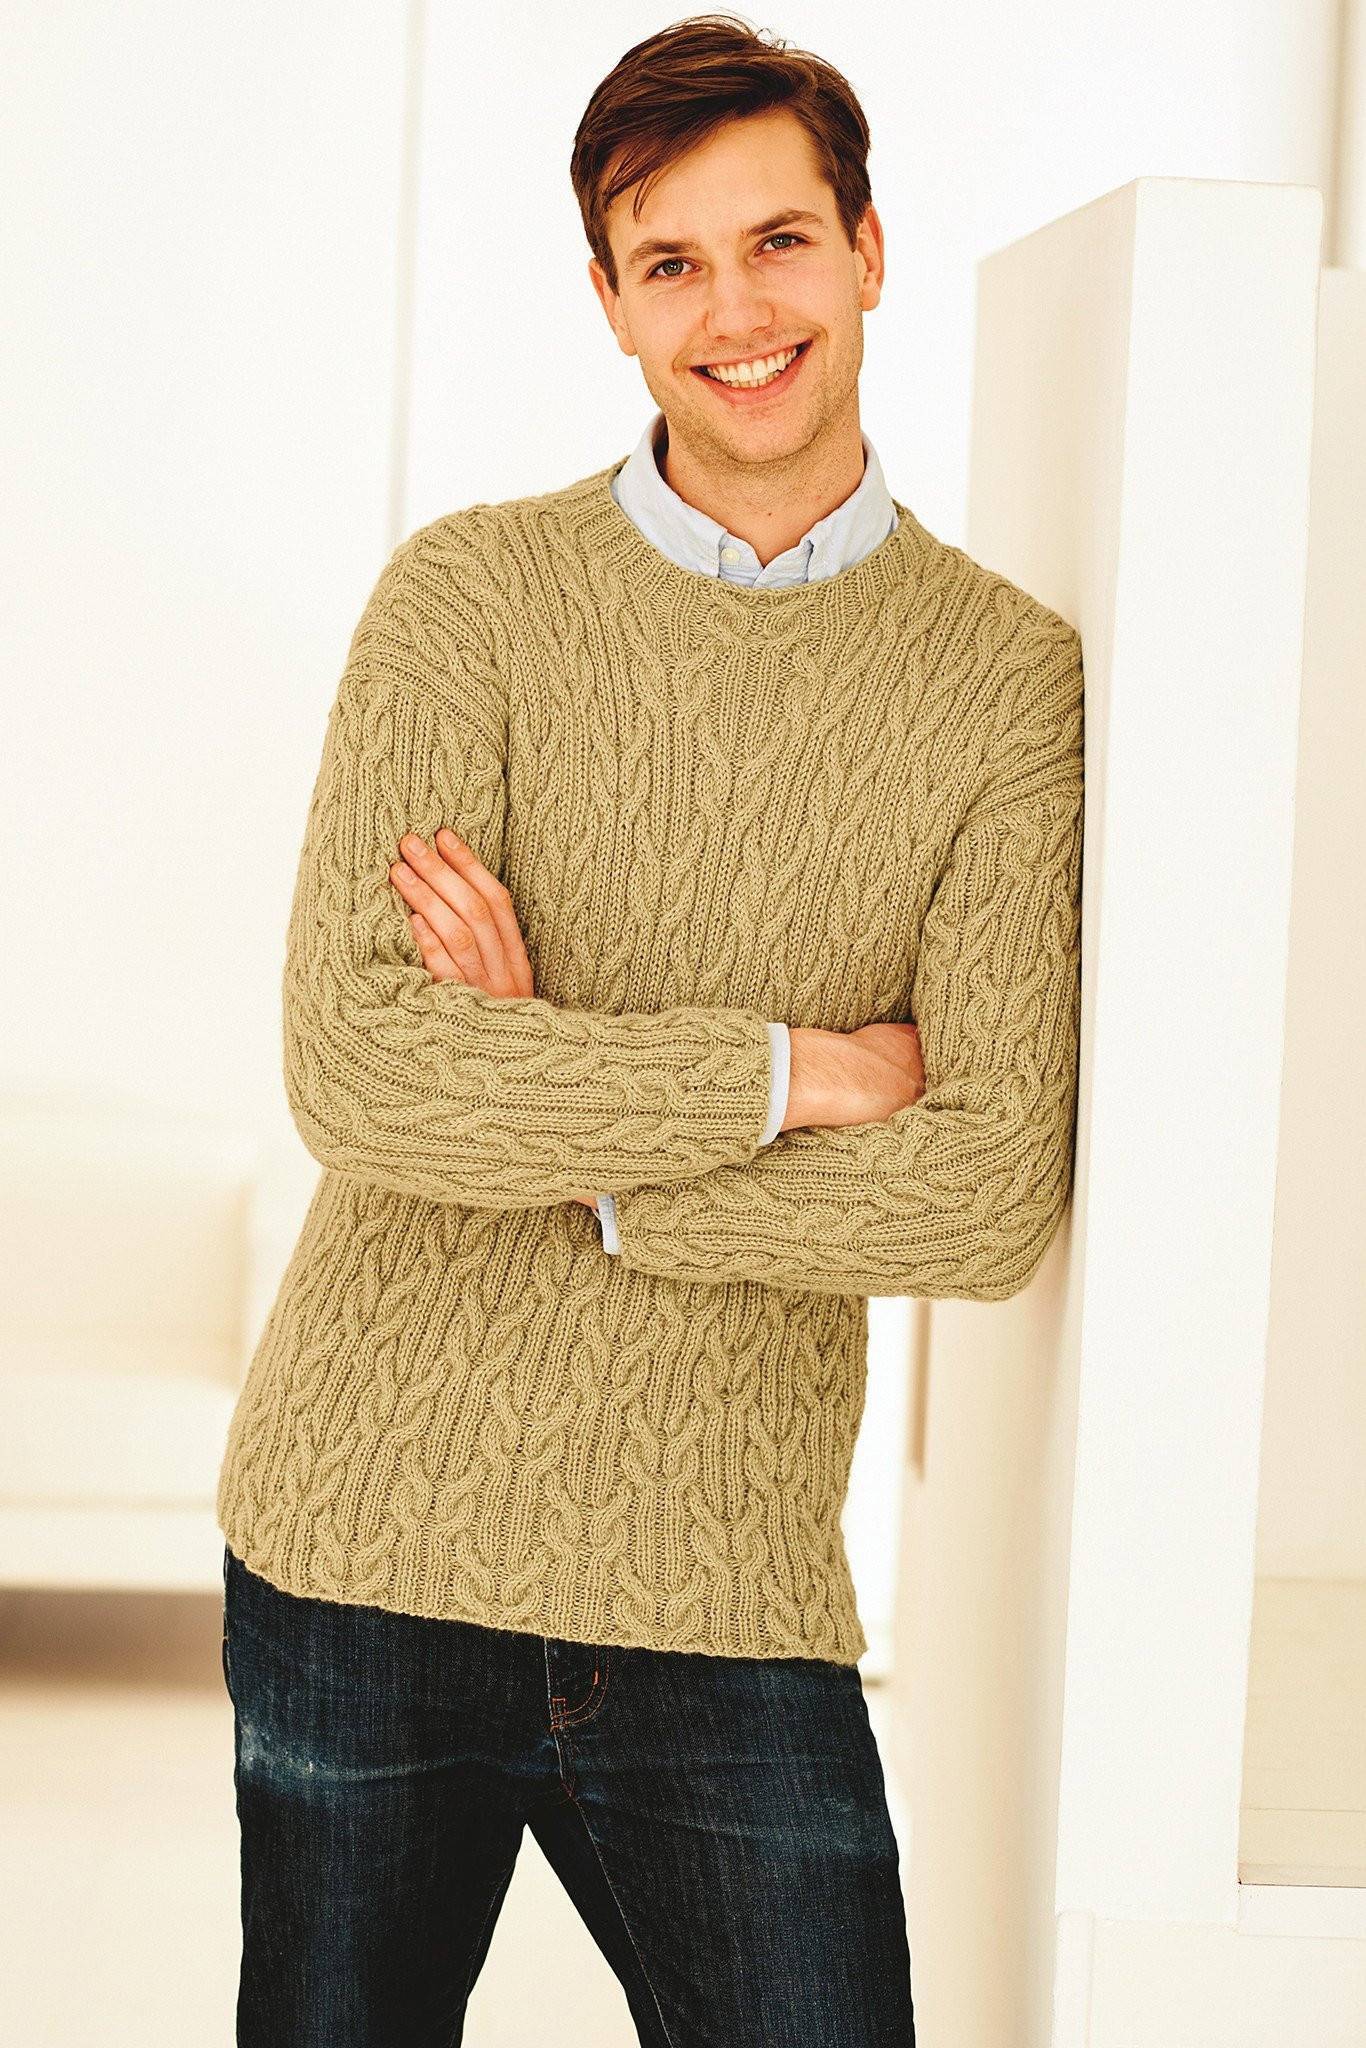 Casual Cable Mens Jumper Knitting Pattern | The Knitting ...